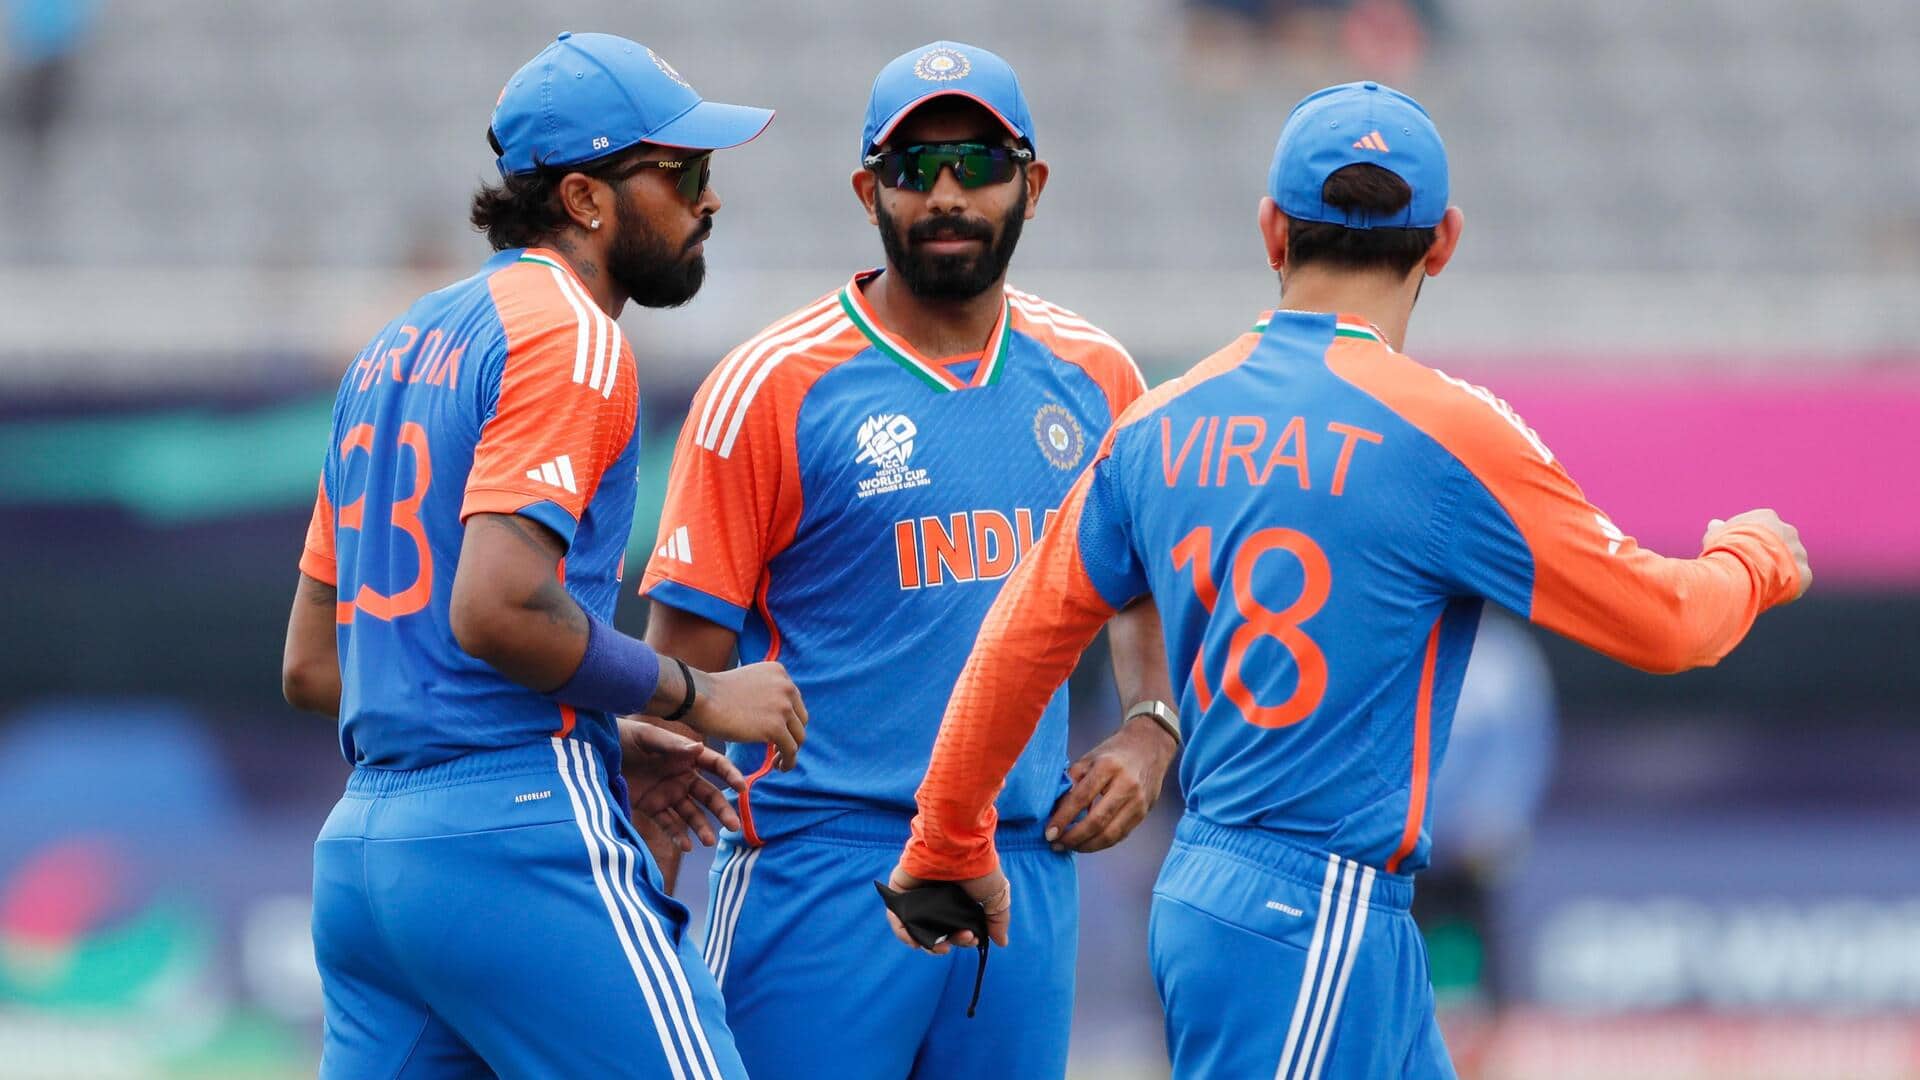 India vs Pakistan: Decoding the rivalry in numbers (T20Is)